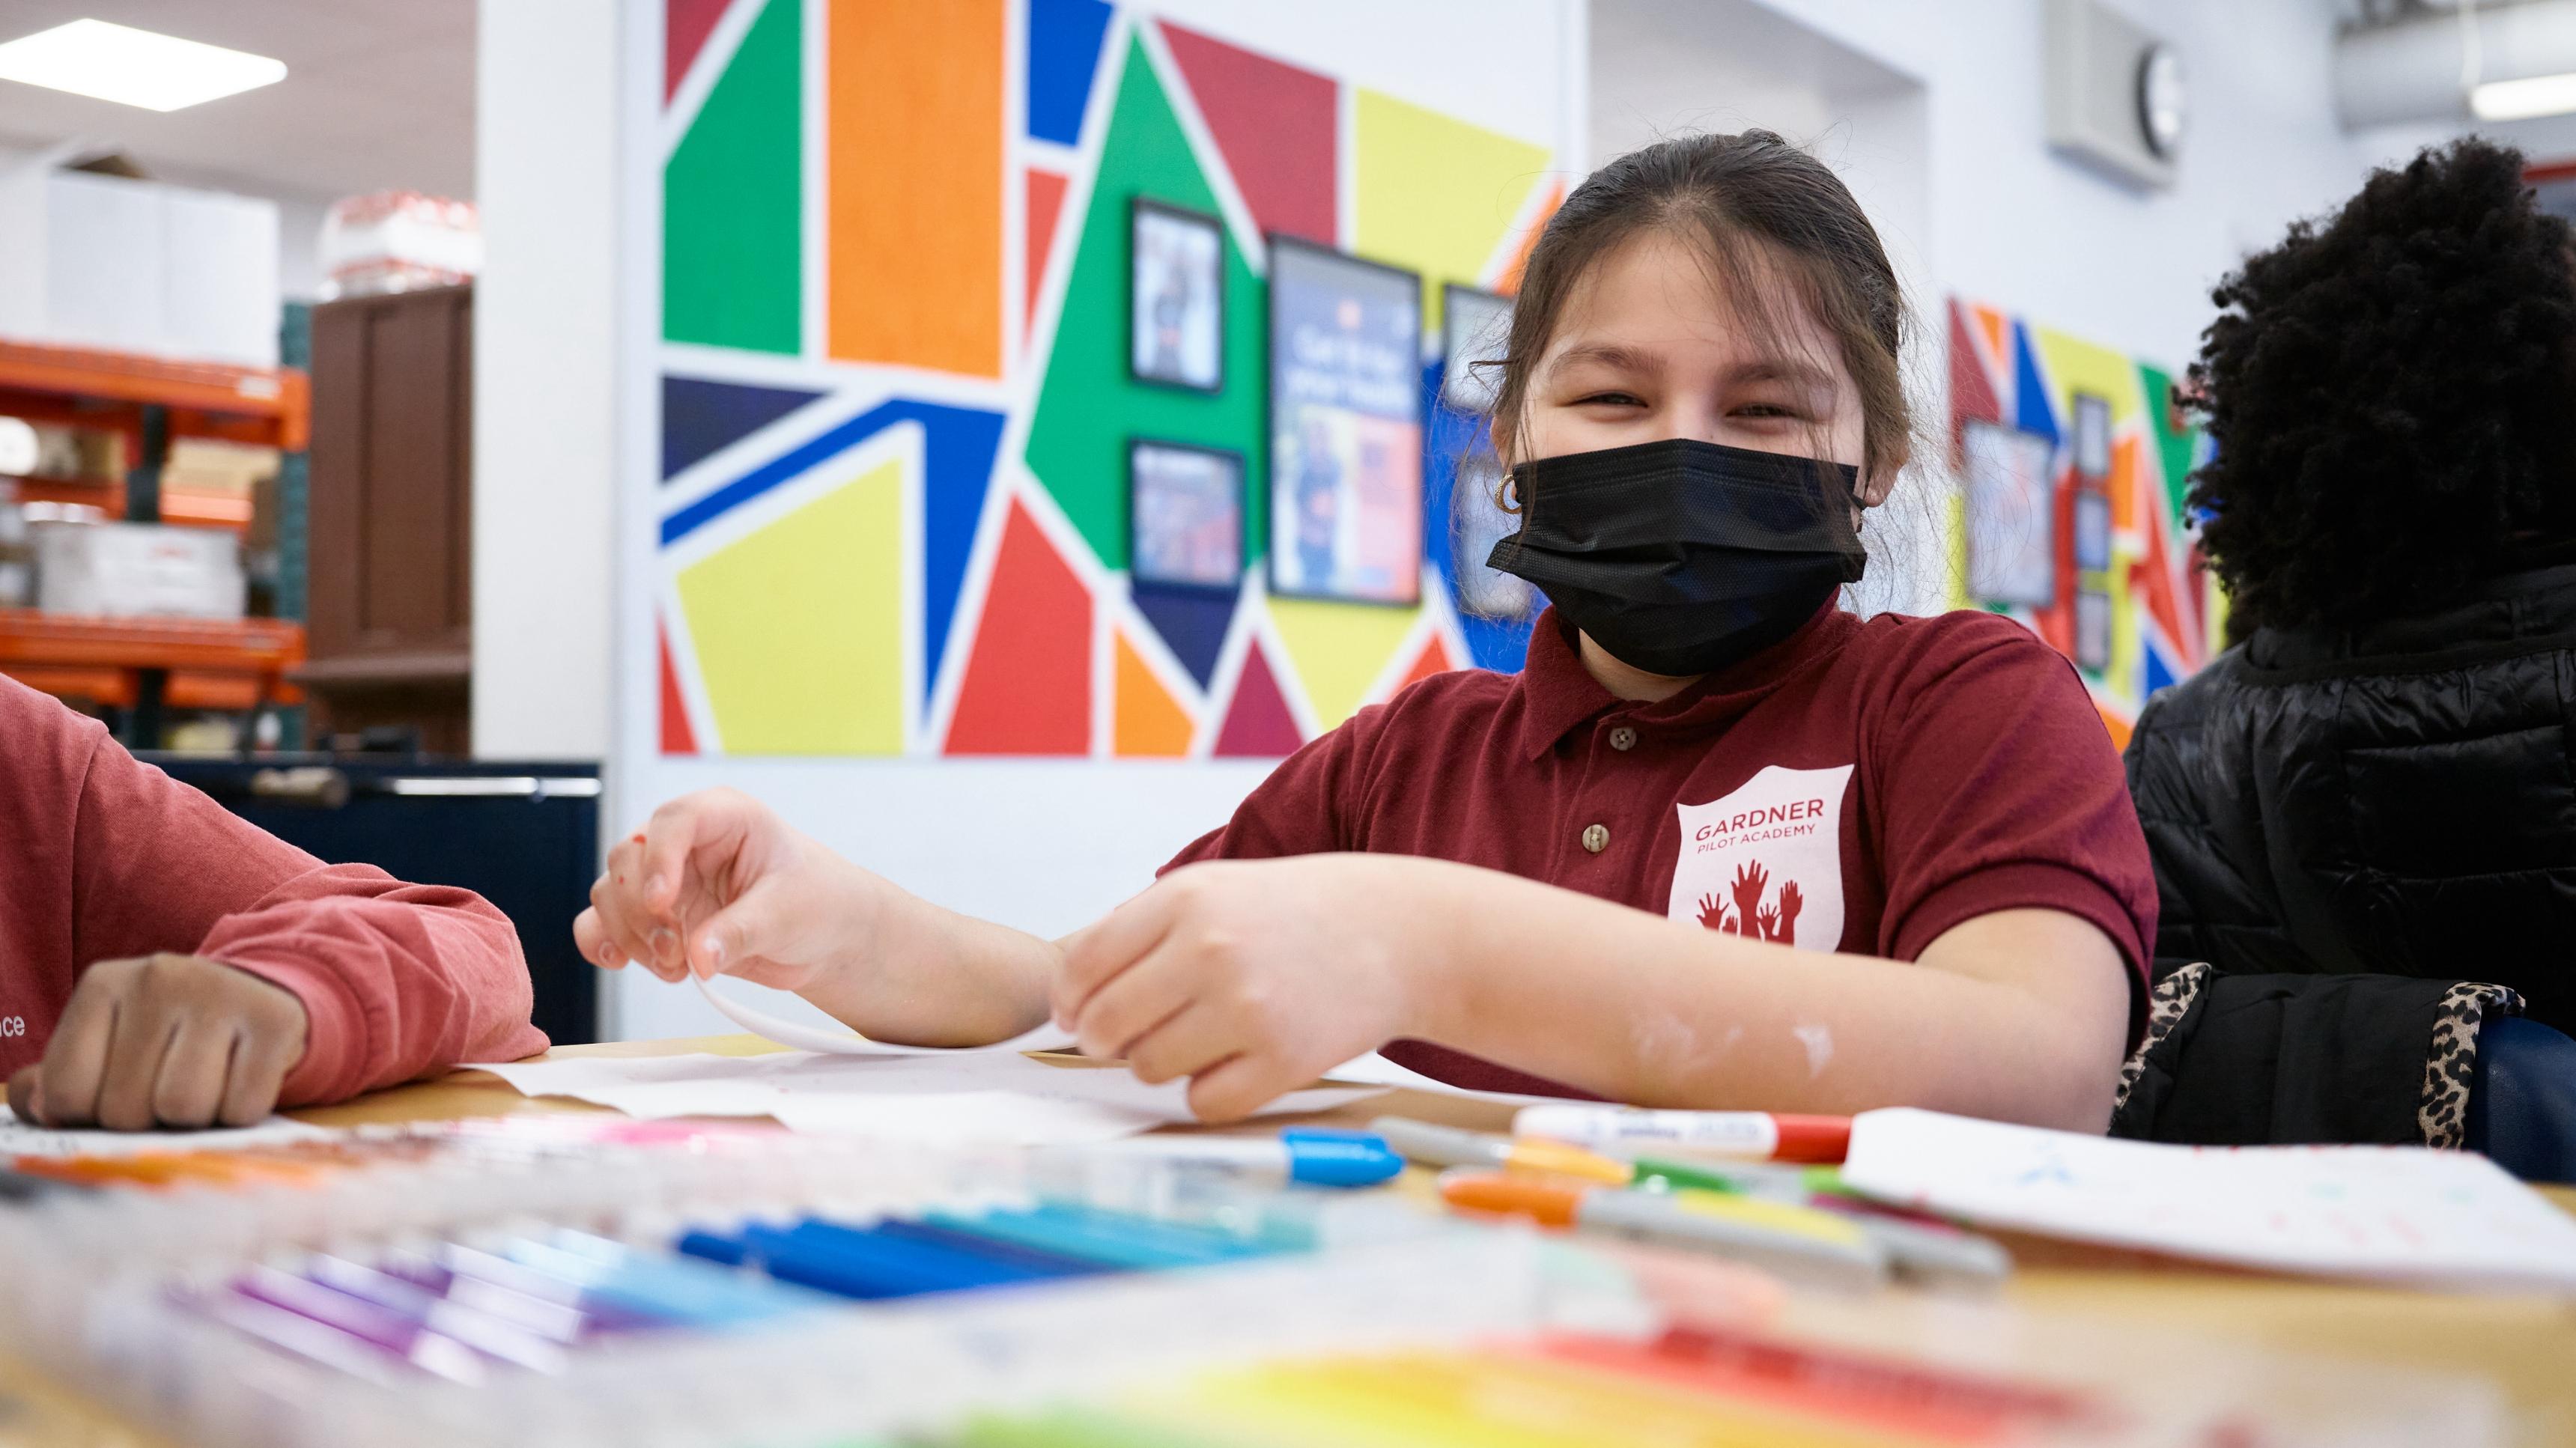 Young girl wearing a face mask, drawing in a classroom